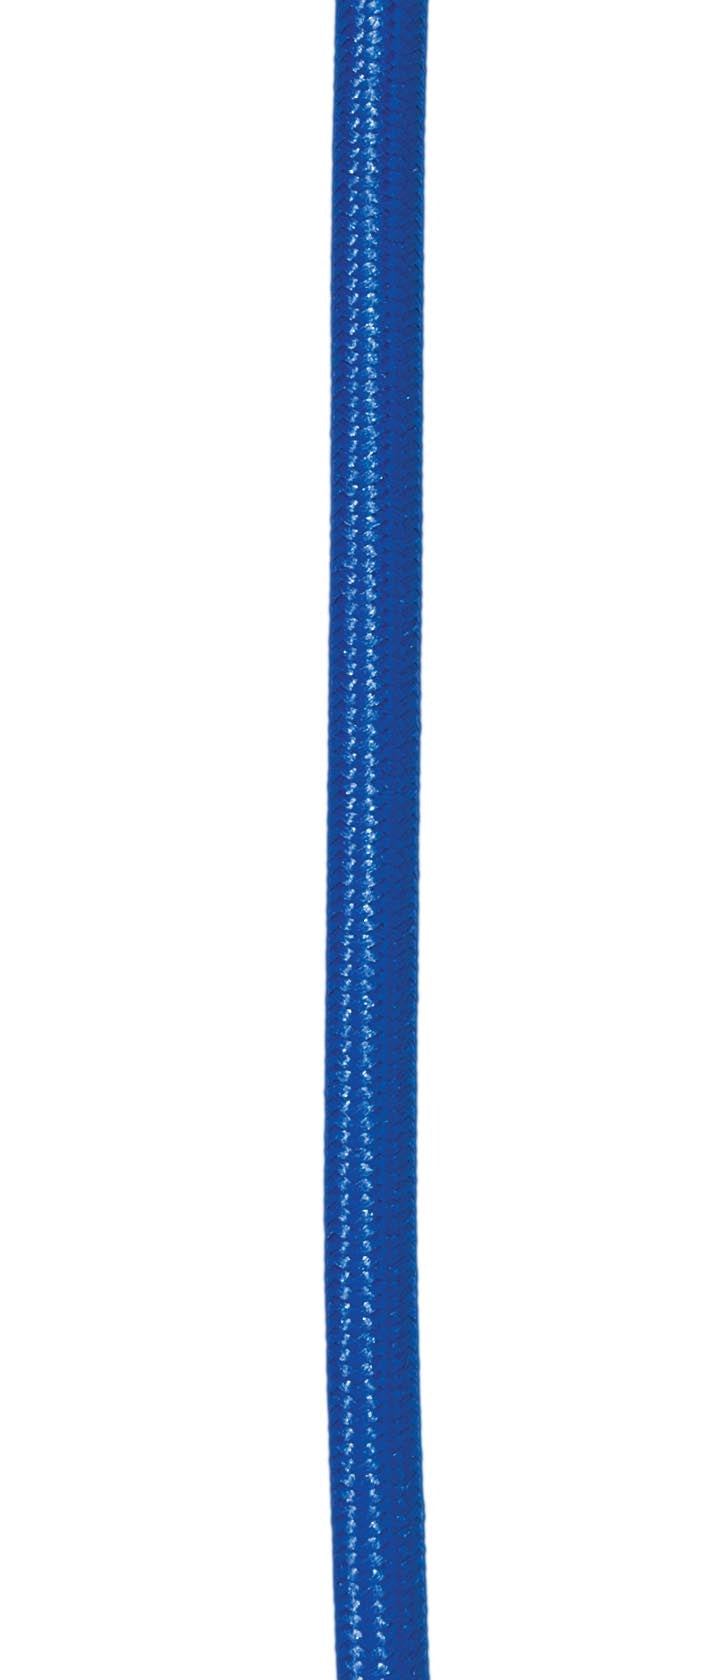 SVT-B Blue Color, Fabric Covered Parallel Lamp Cord - Wire, Choice of Length 